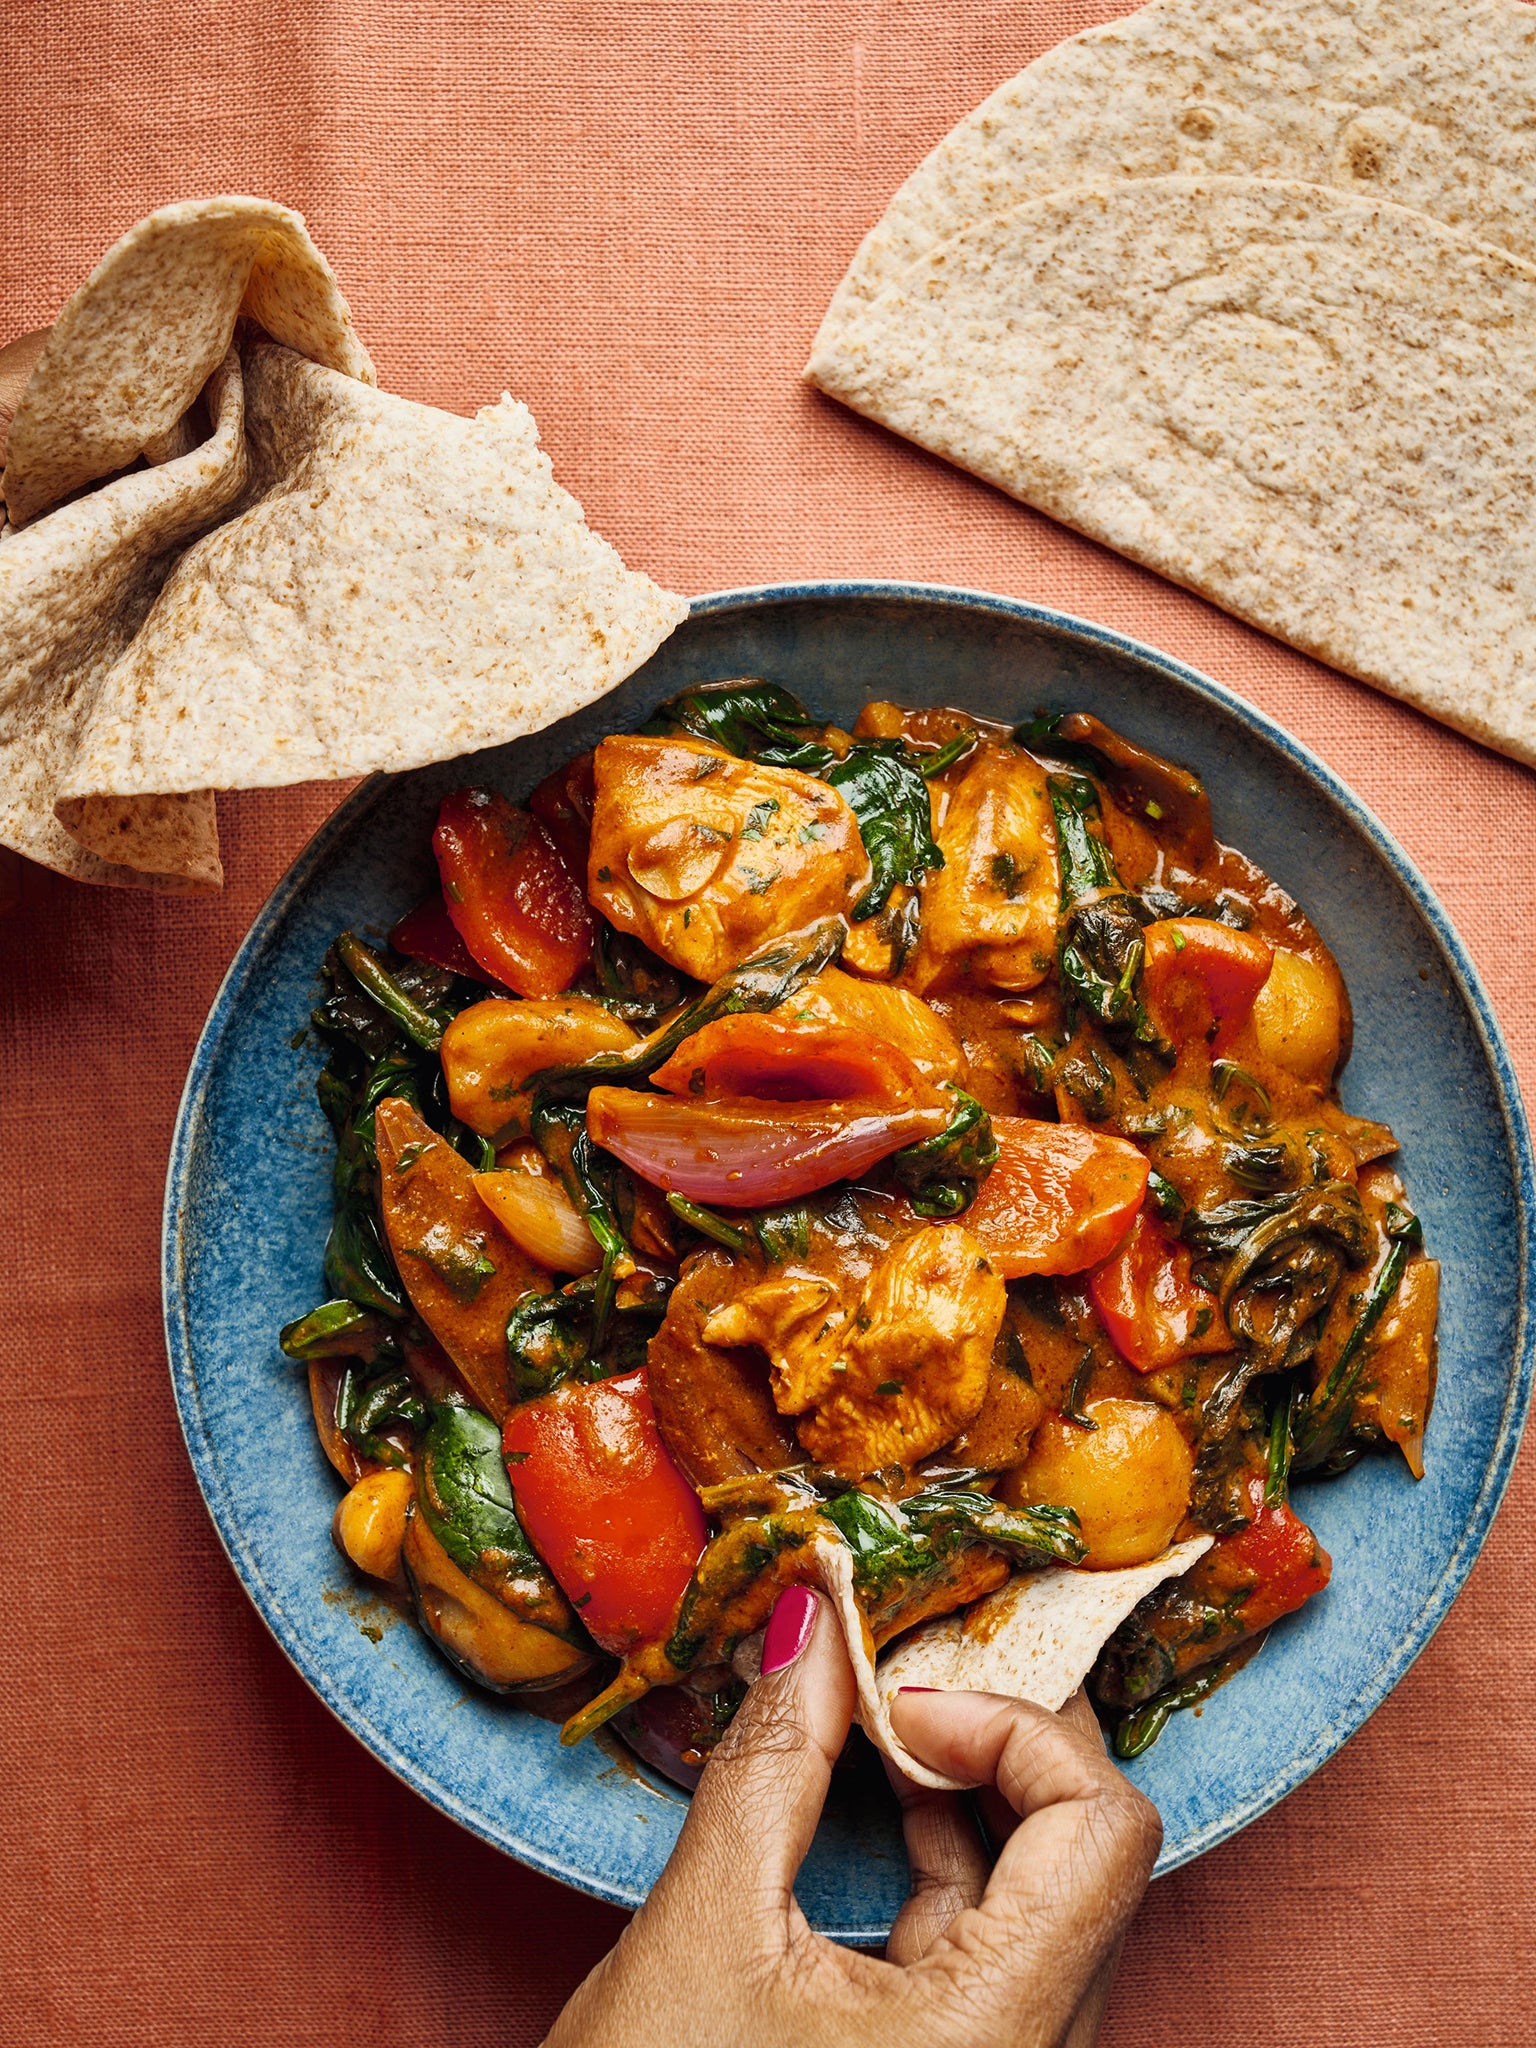 This succulent curry is flavoured with the TV cook’s signature spice blend